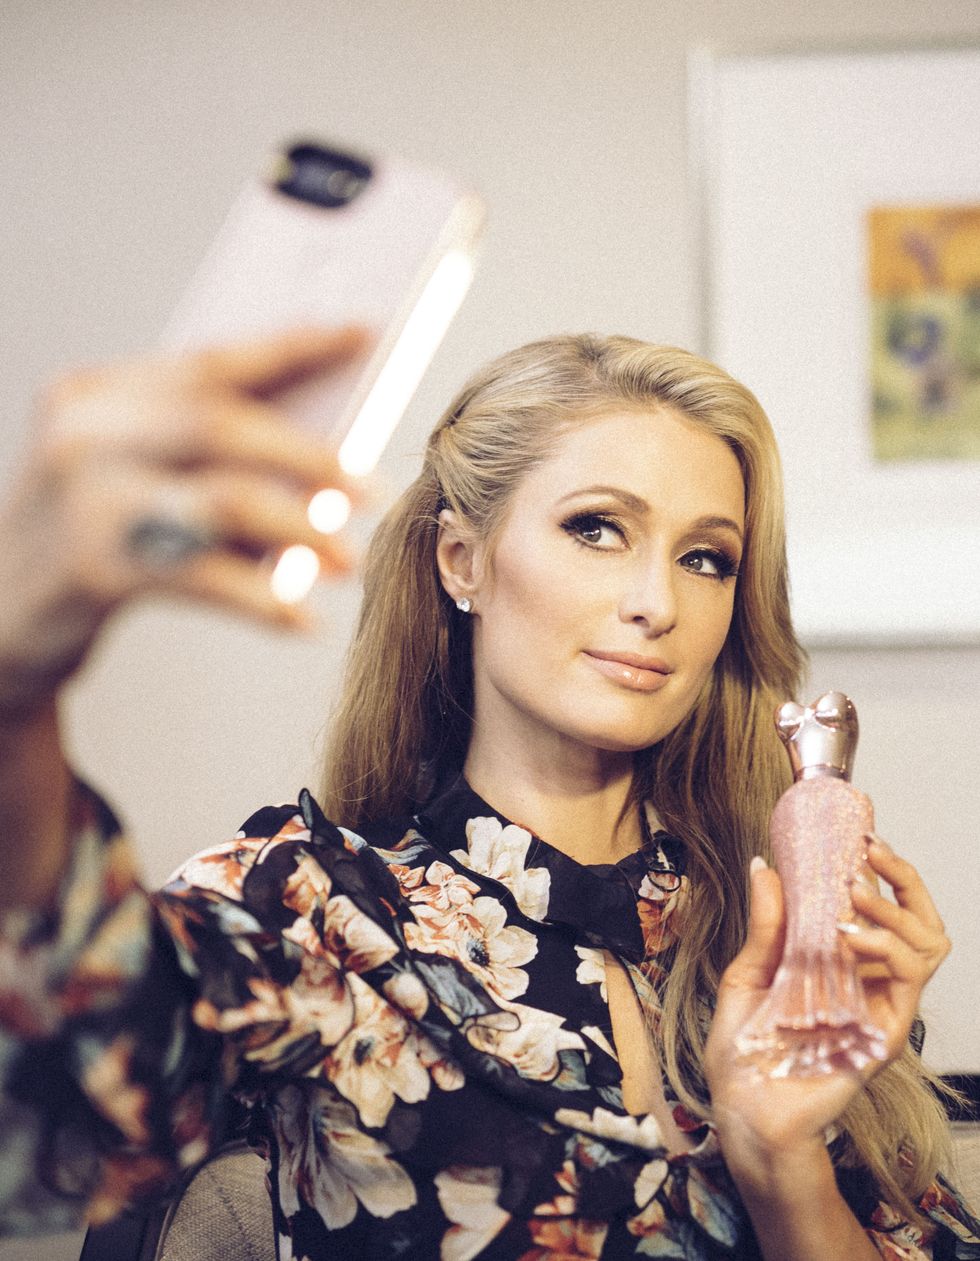 sydney, australia   november 30  editors note this image has been digitally altered paris hilton poses for a selfie during a promotion visit to australia to launch her 23rd fragrance, rosé rush on november 30, 2017 in sydney, australia  photo by cole bennettsgetty images for paris hilton